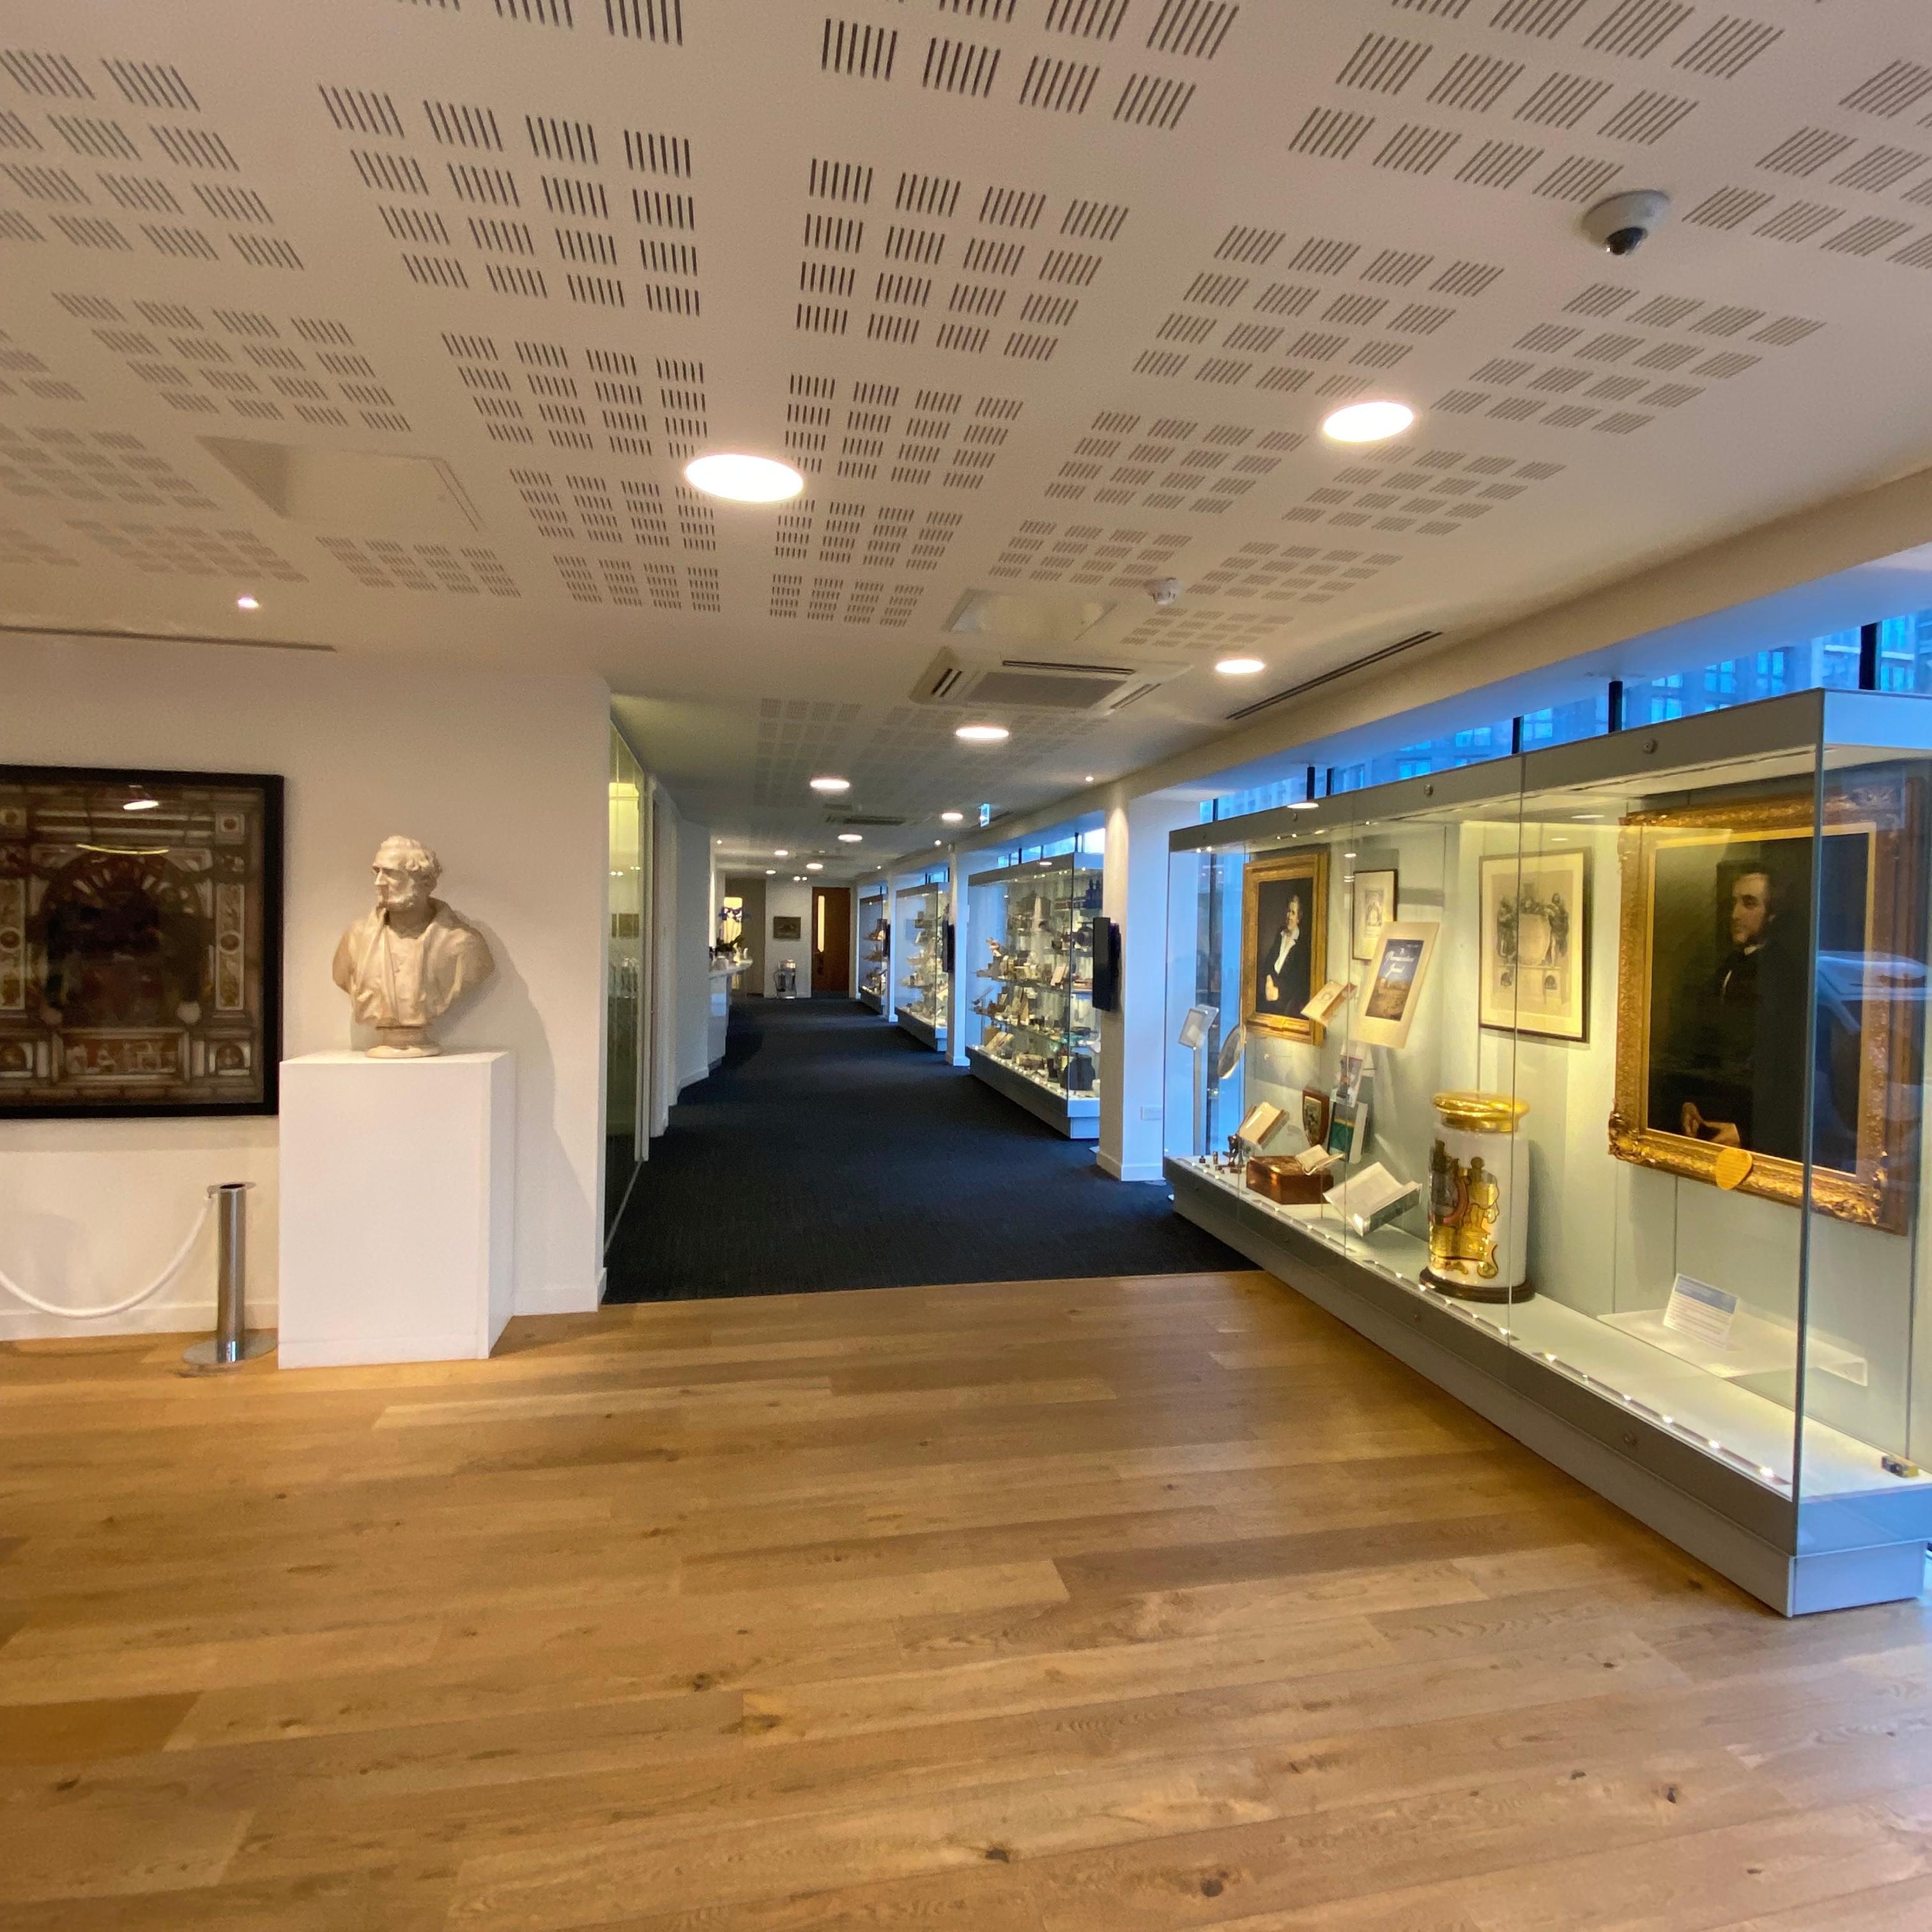 Museum Section three corridor with bust and display cases. Image shows a section where wooden floor changes to carpeted floor